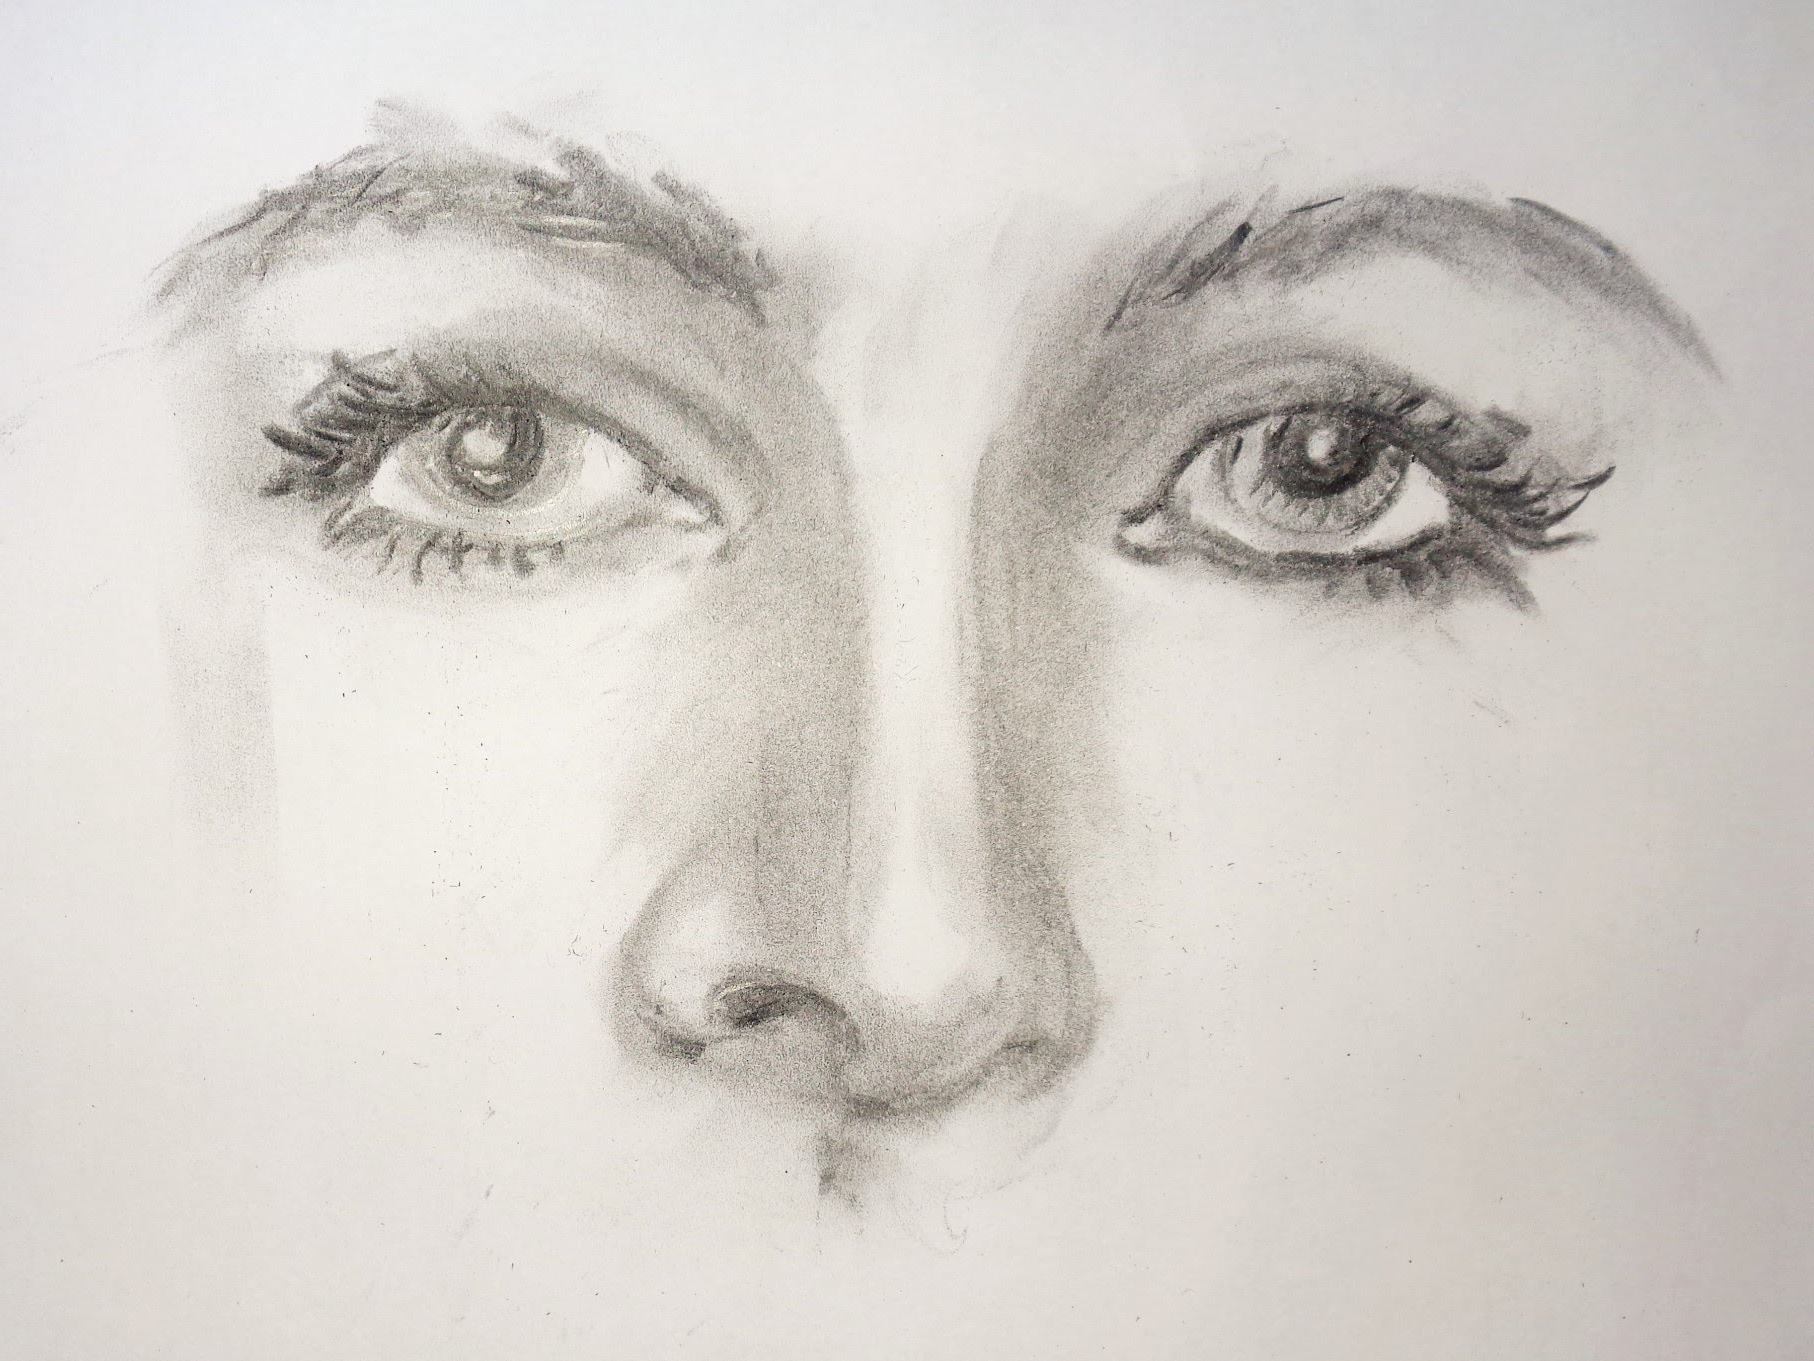 Creative Face Drawing Pencil Sketch with Realistic